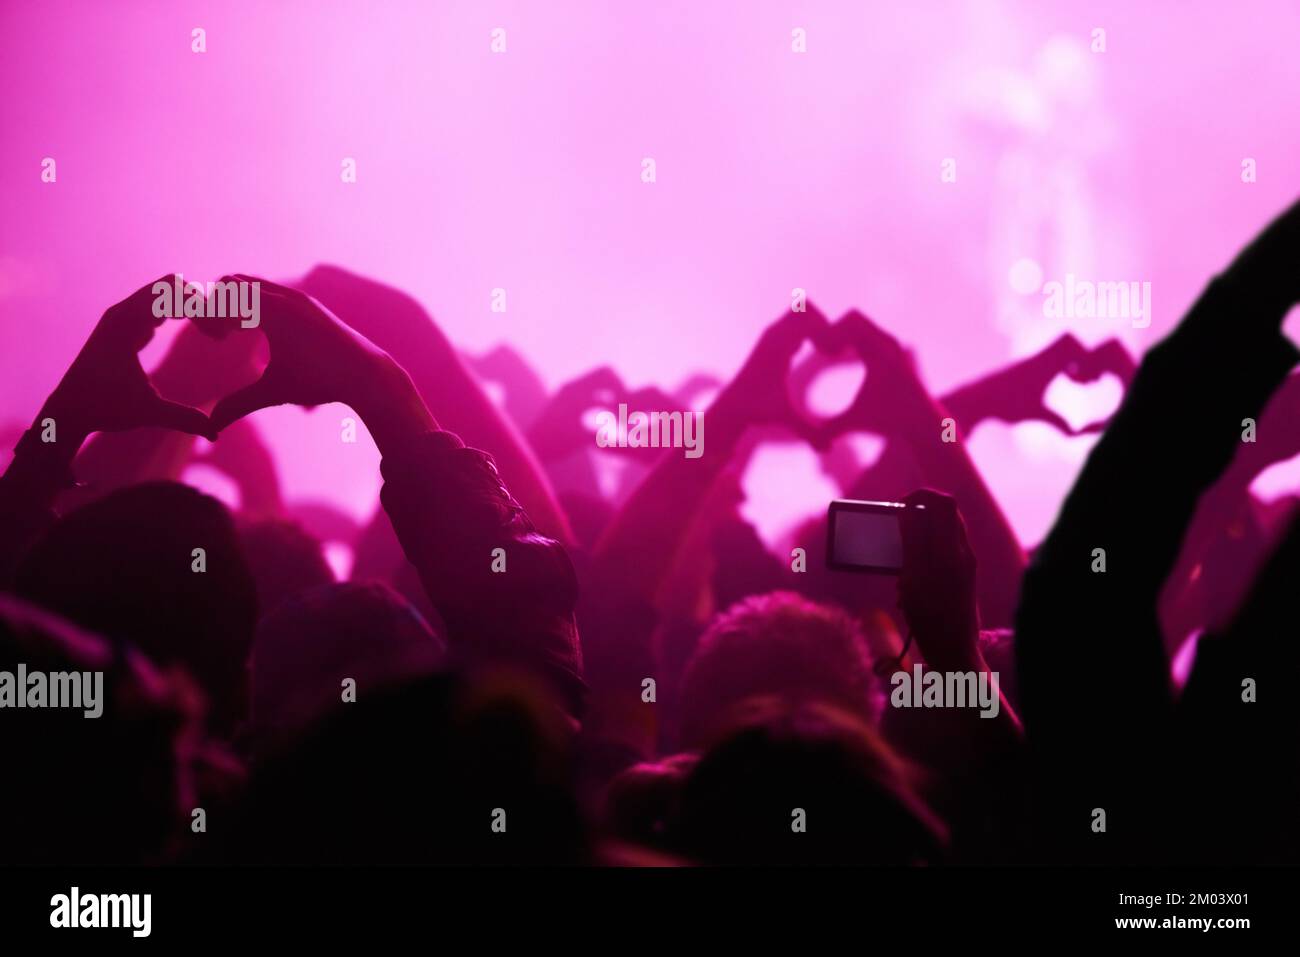 Together as one. Rear view of an audience making heart-shapes with their hands. Stock Photo